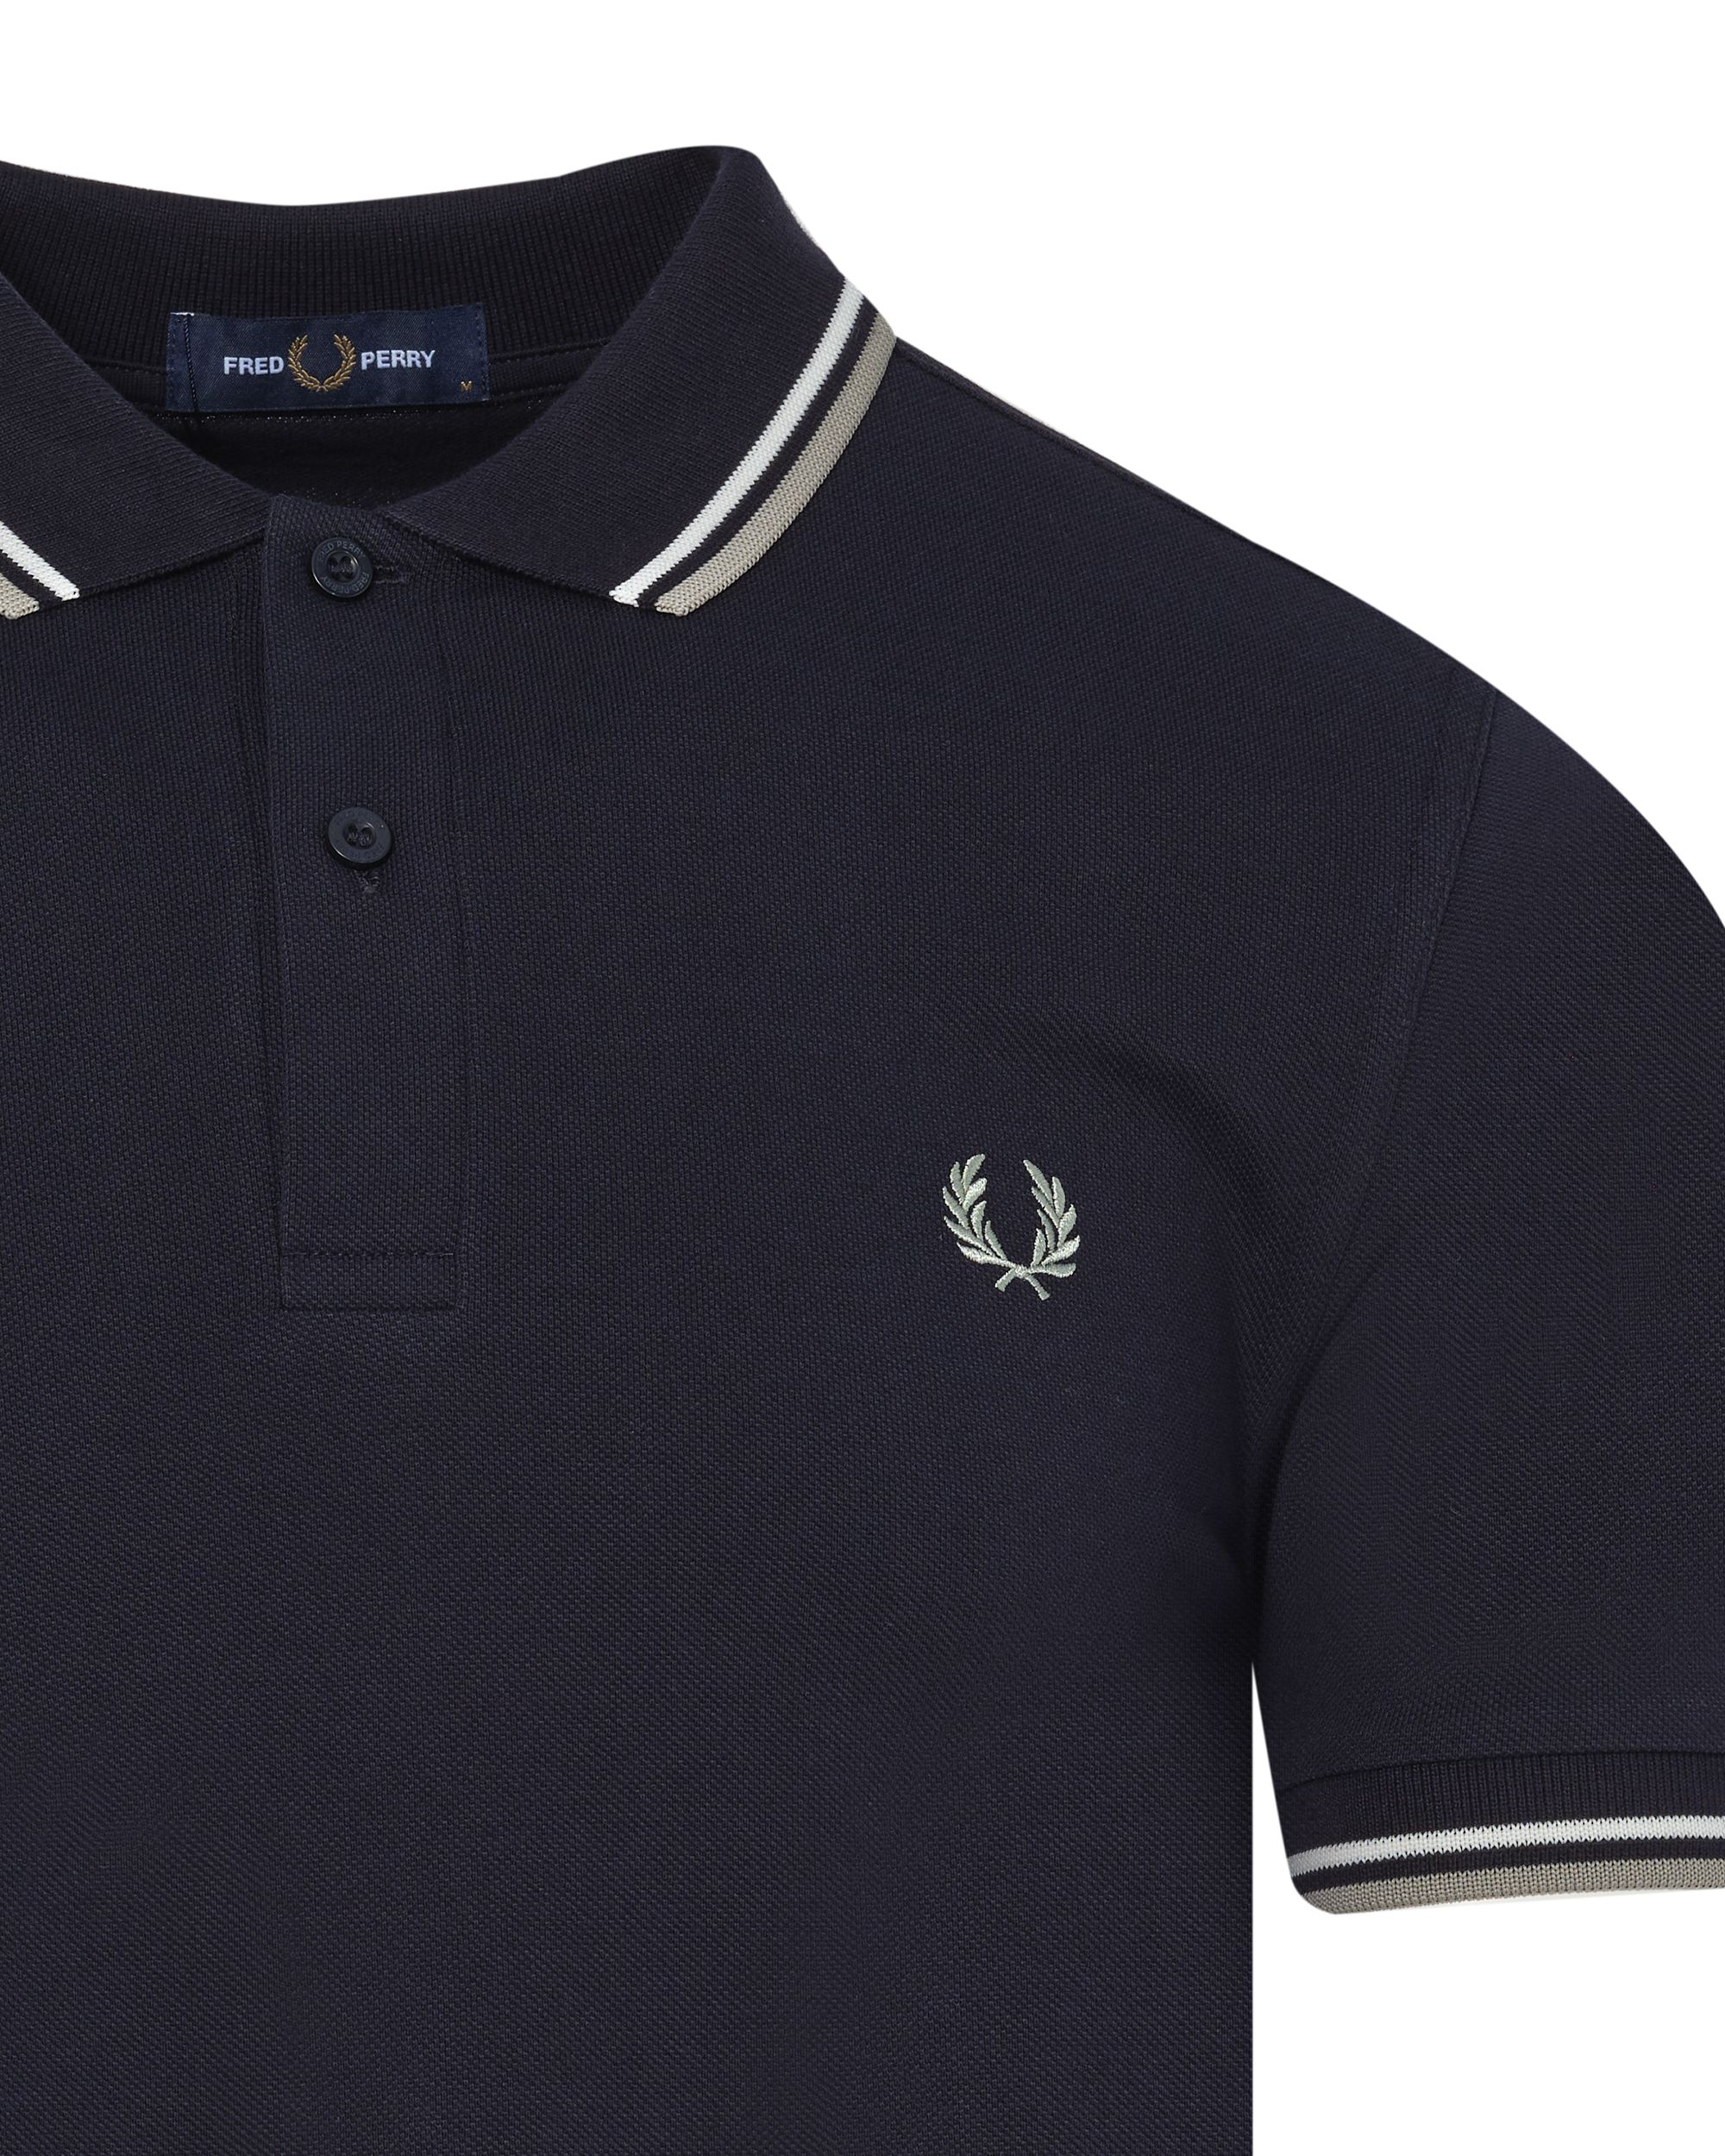 Fred Perry Polo KM Blauw 083525-001-L